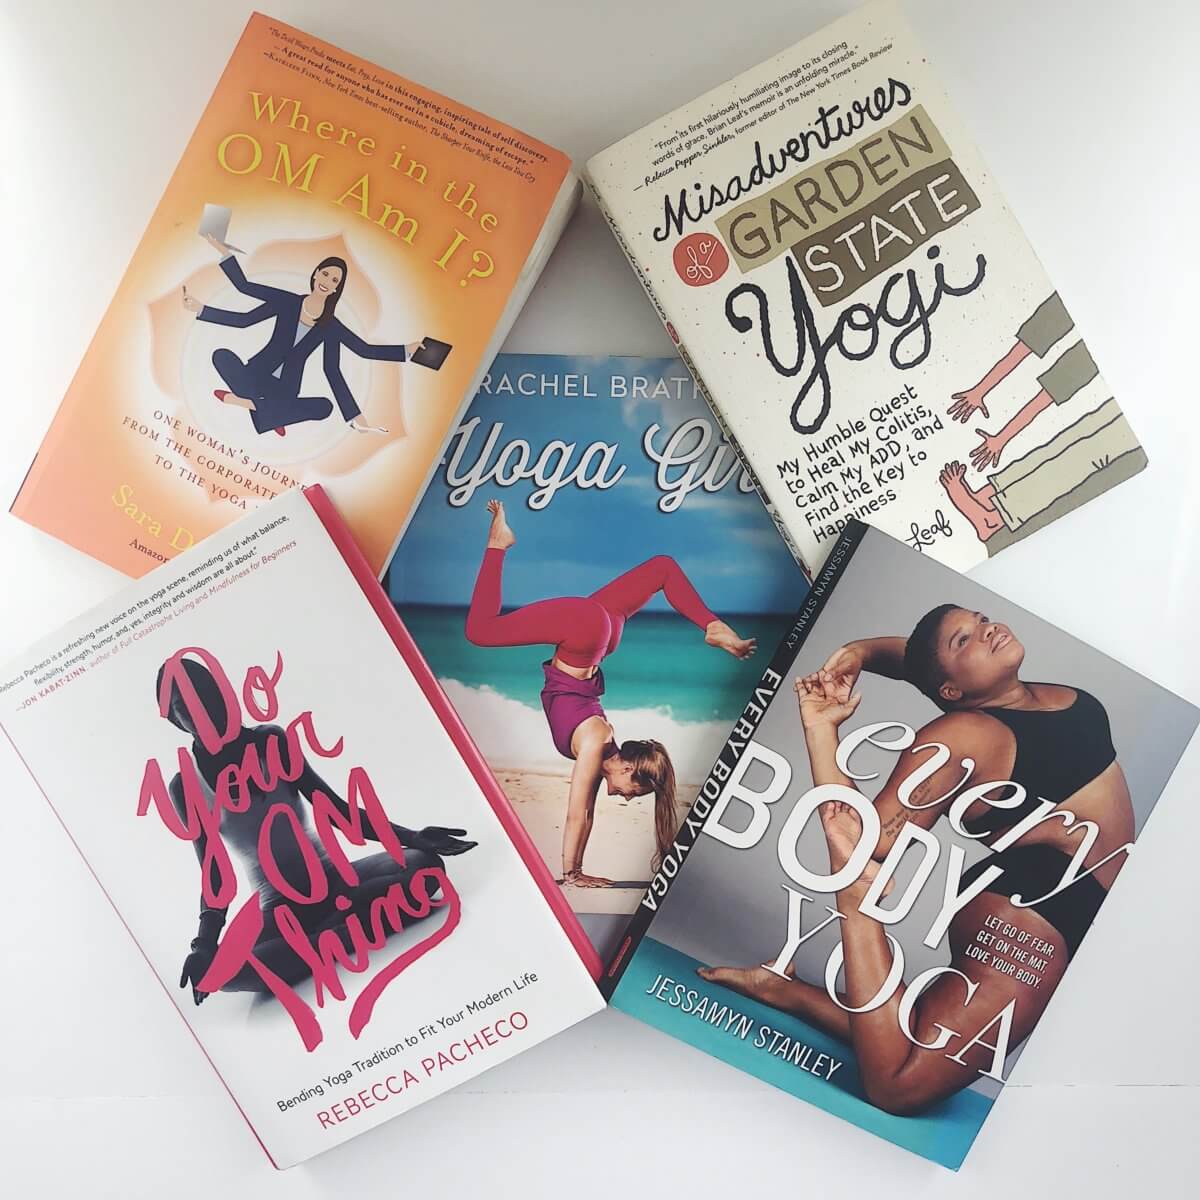 So many yoga books are inaccessible. These five are modern, relevant, and relatable! Check out my 5 yoga book recommendations (that you'll actually want to read)!